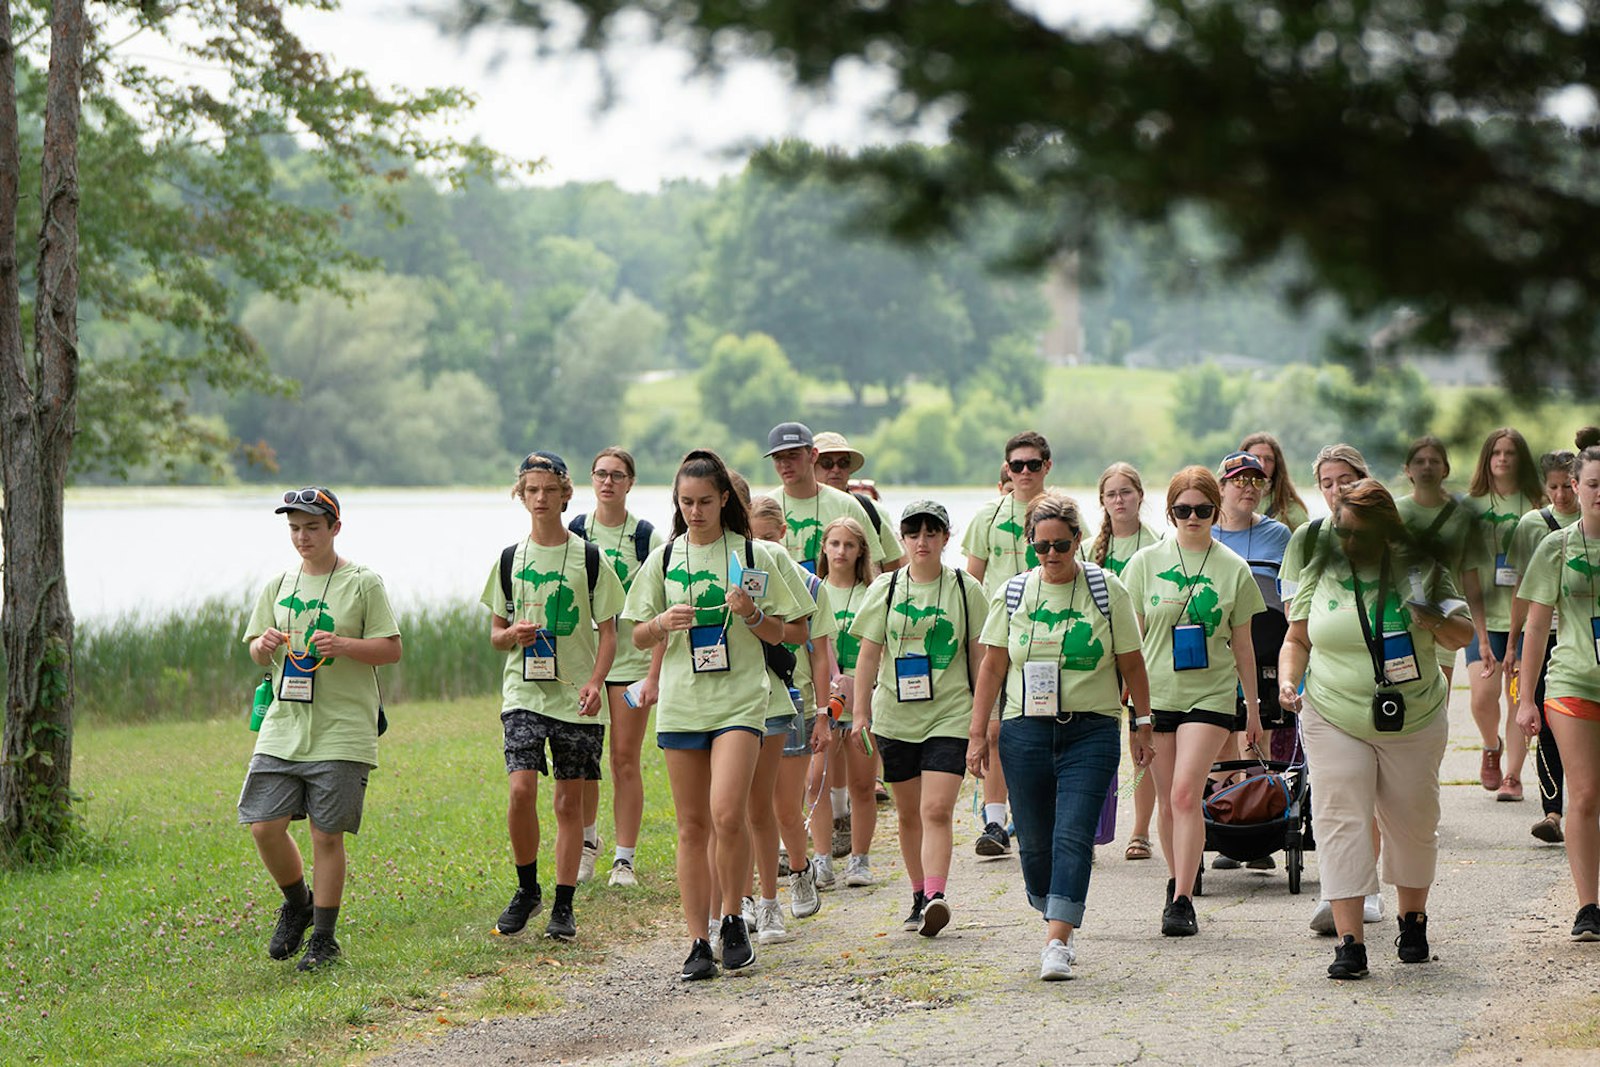 More than 60 young people take part in a walking rosary pilgrimage around the lake at Our Lady of the Fields Camp in Brighton during a World Youth Day "Home" event Aug. 5.